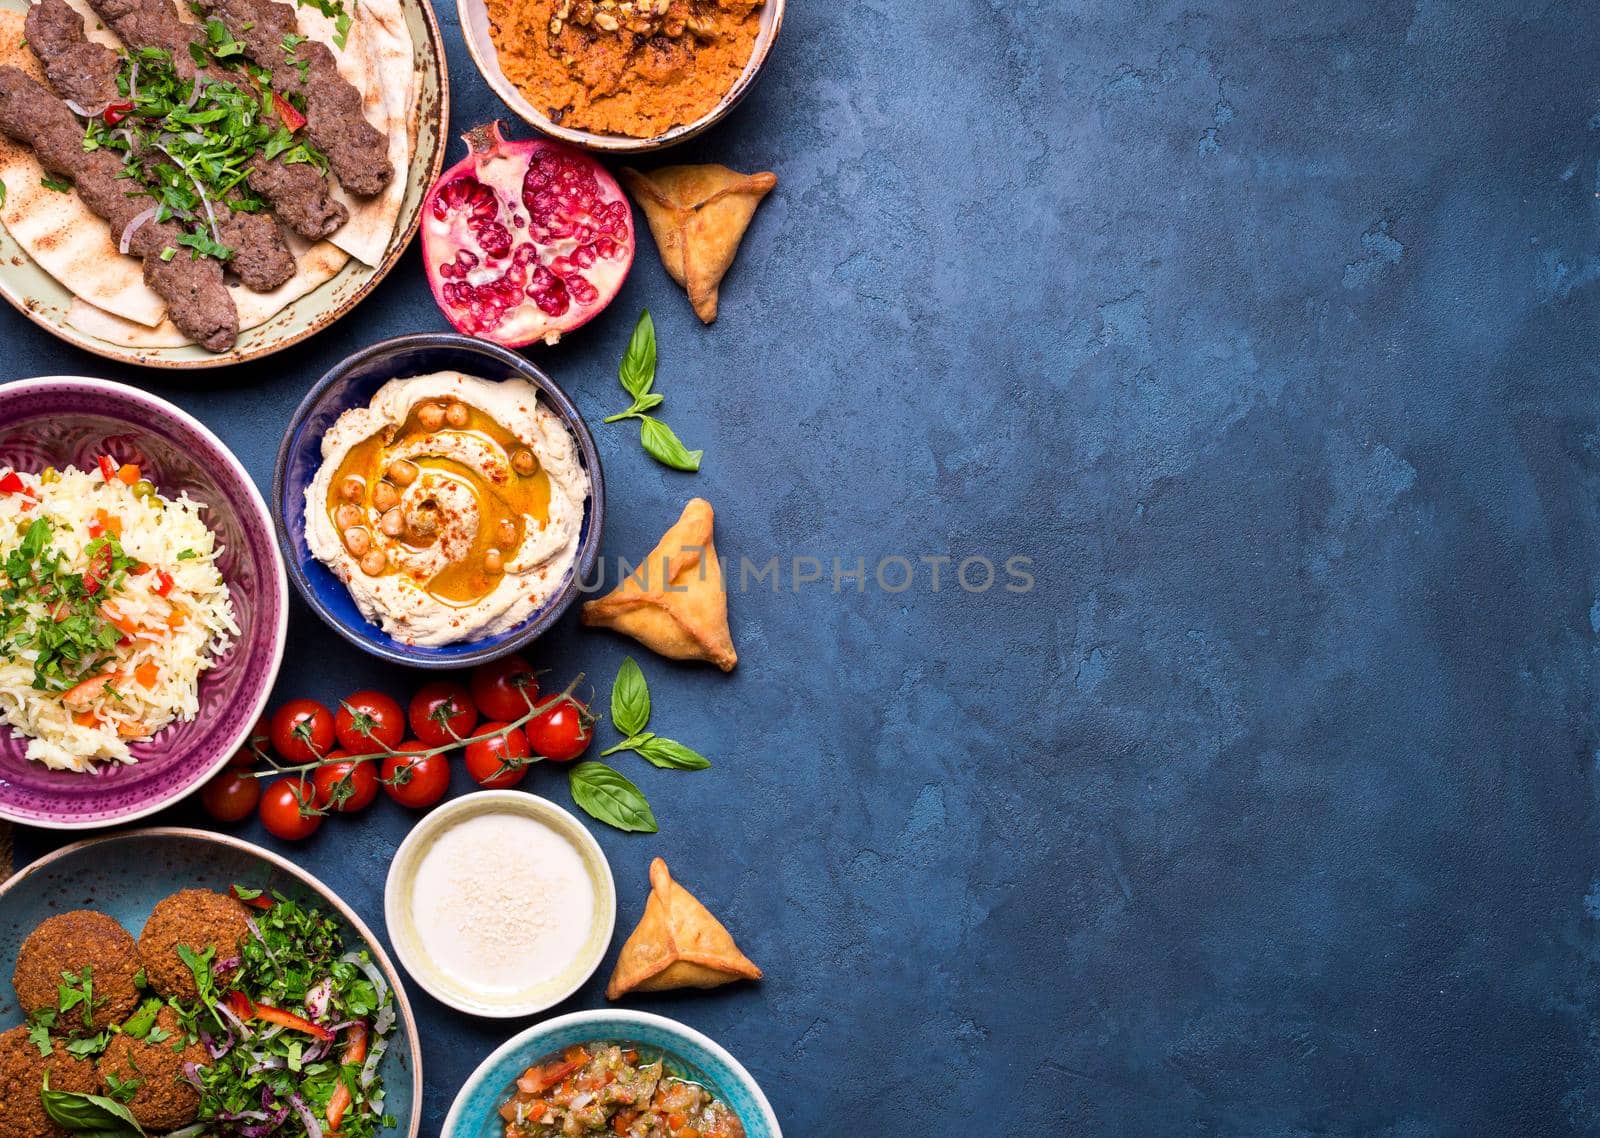 Middle eastern or arabic dishes and assorted meze on concrete rustic background. Meat kebab, falafel, baba ghanoush, hummus, sambusak, rice, tahini, kibbeh, pita. Halal food. Space for text. Top view